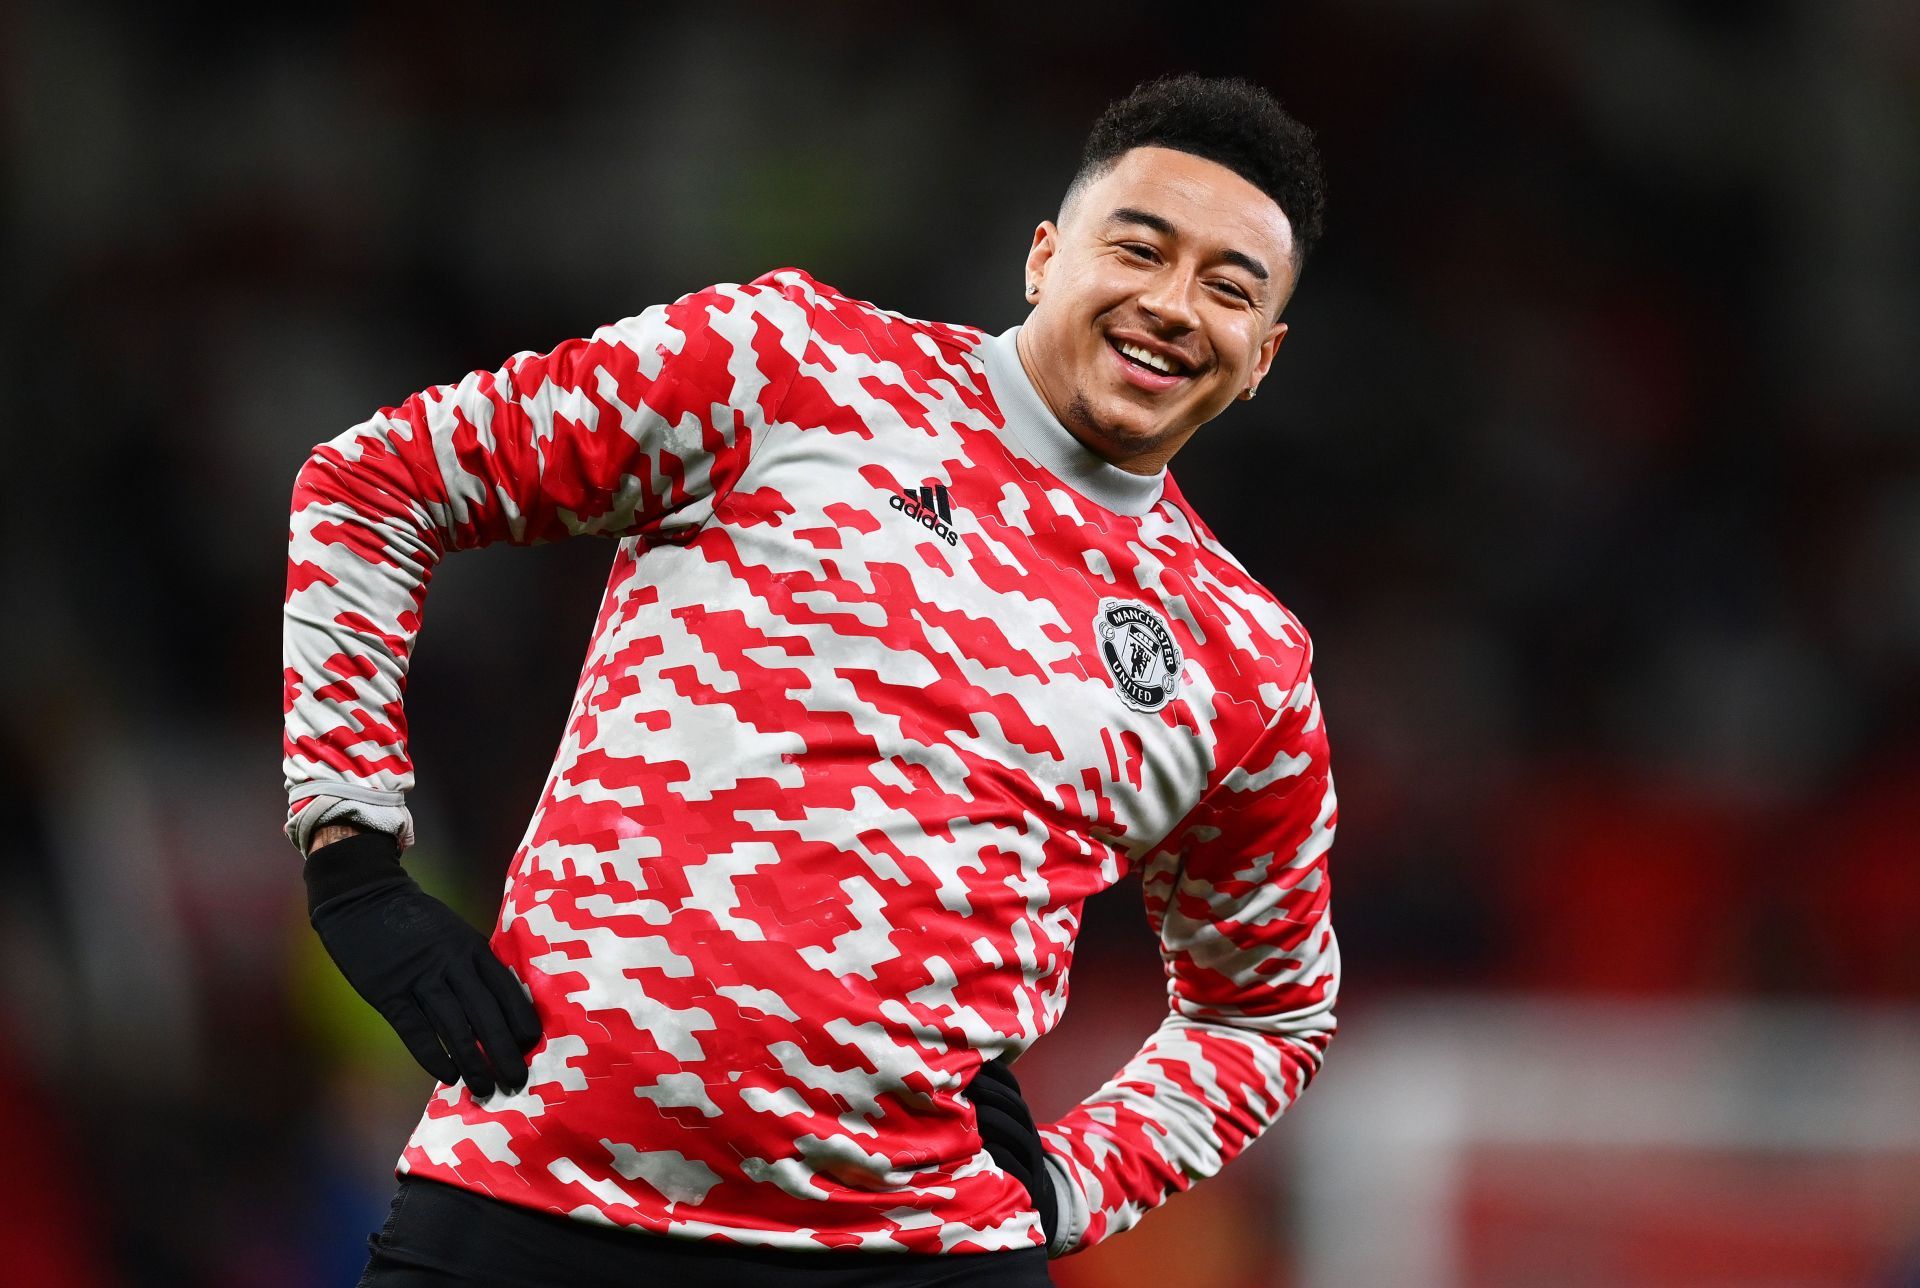 Lingard has started just two games for Manchester United across all competitions so far this term